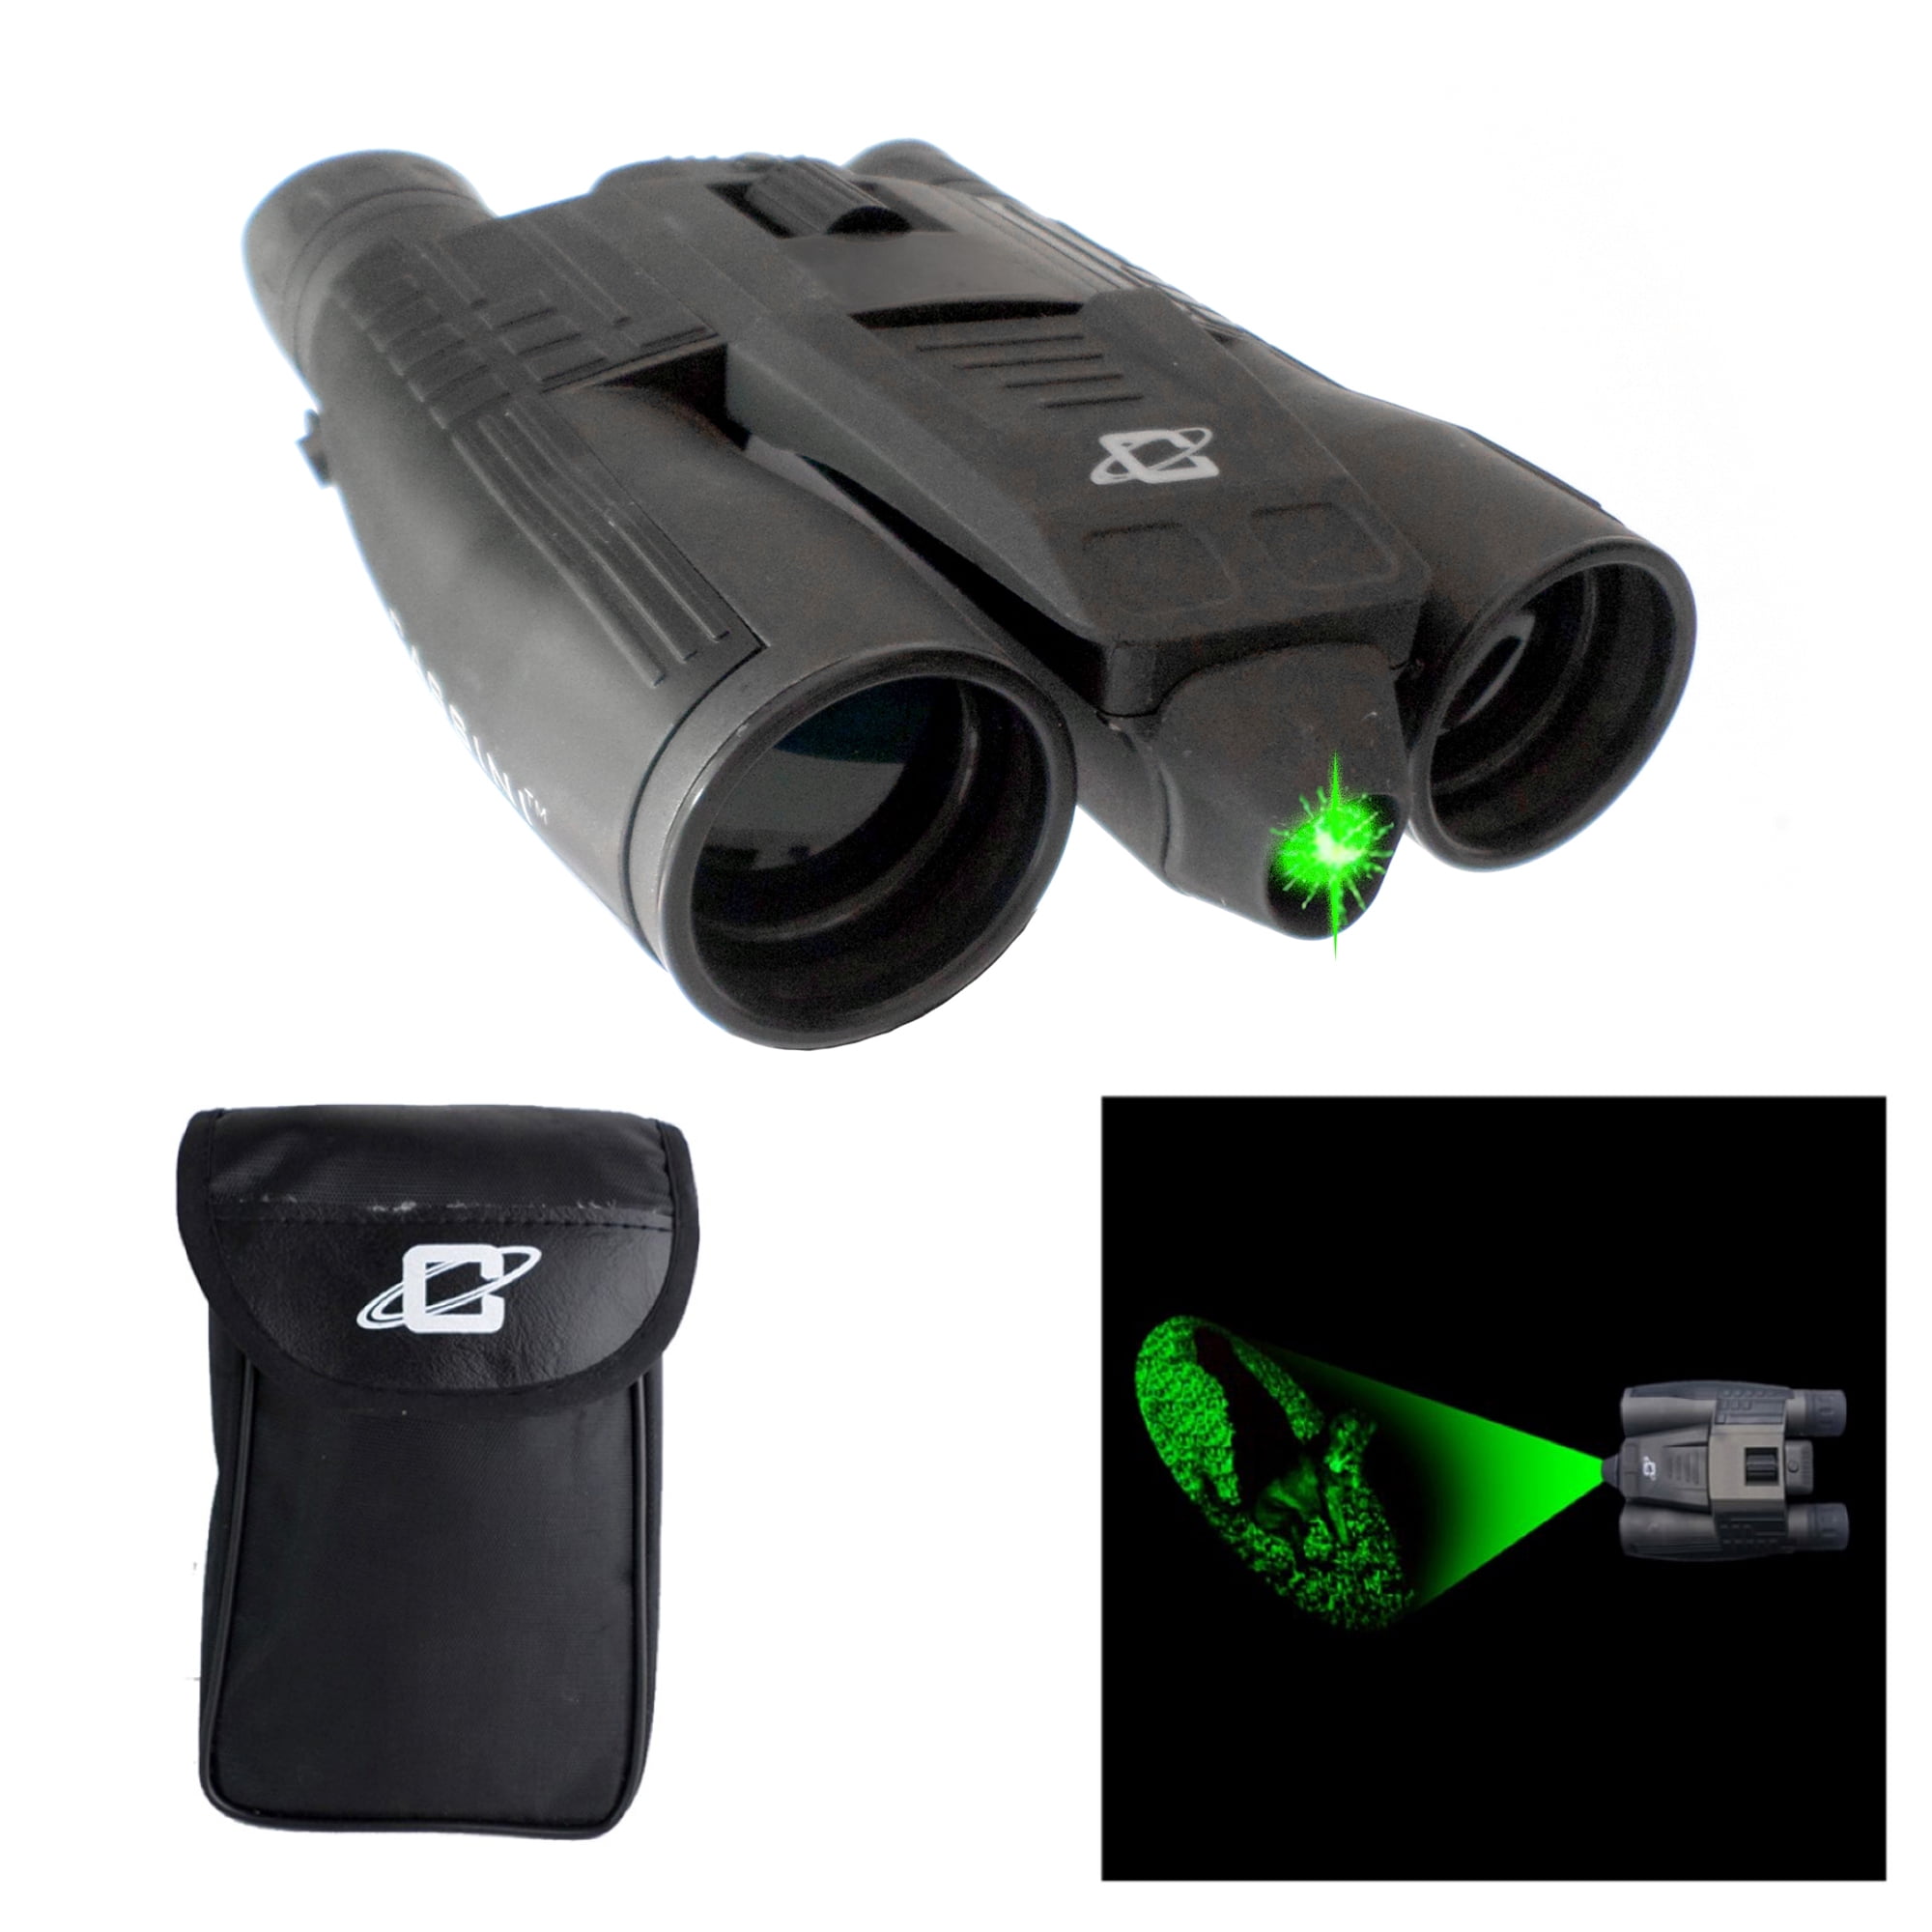 Reveals Objects 150-Yards Away 10x Magnification Water-Resistant Full Range of Focal Adjustments Atomic Beam Official As Seen On TV Night Hero Binoculars by BulbHead